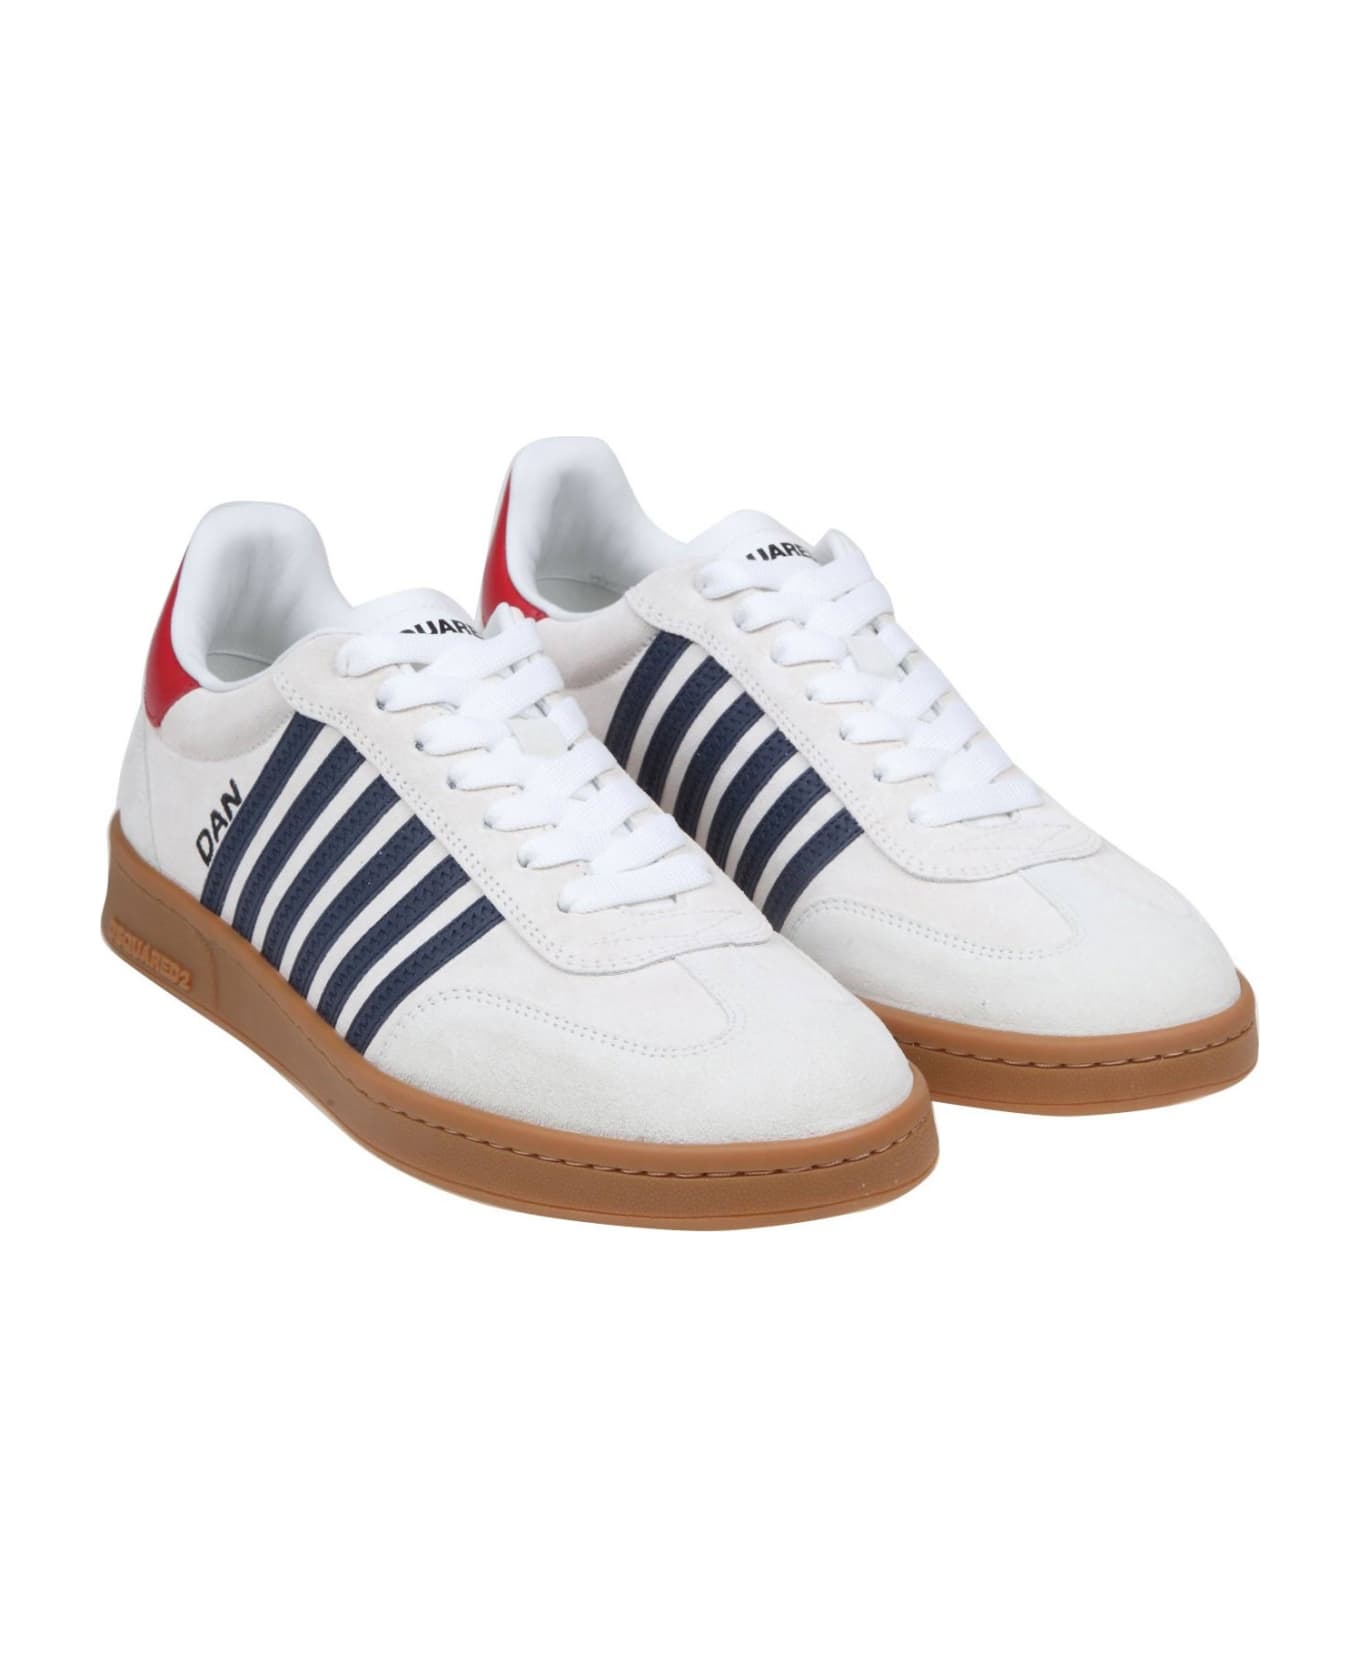 Dsquared2 Boxer Sneakers In White/blue Suede Leather - WHITE/BLU スニーカー